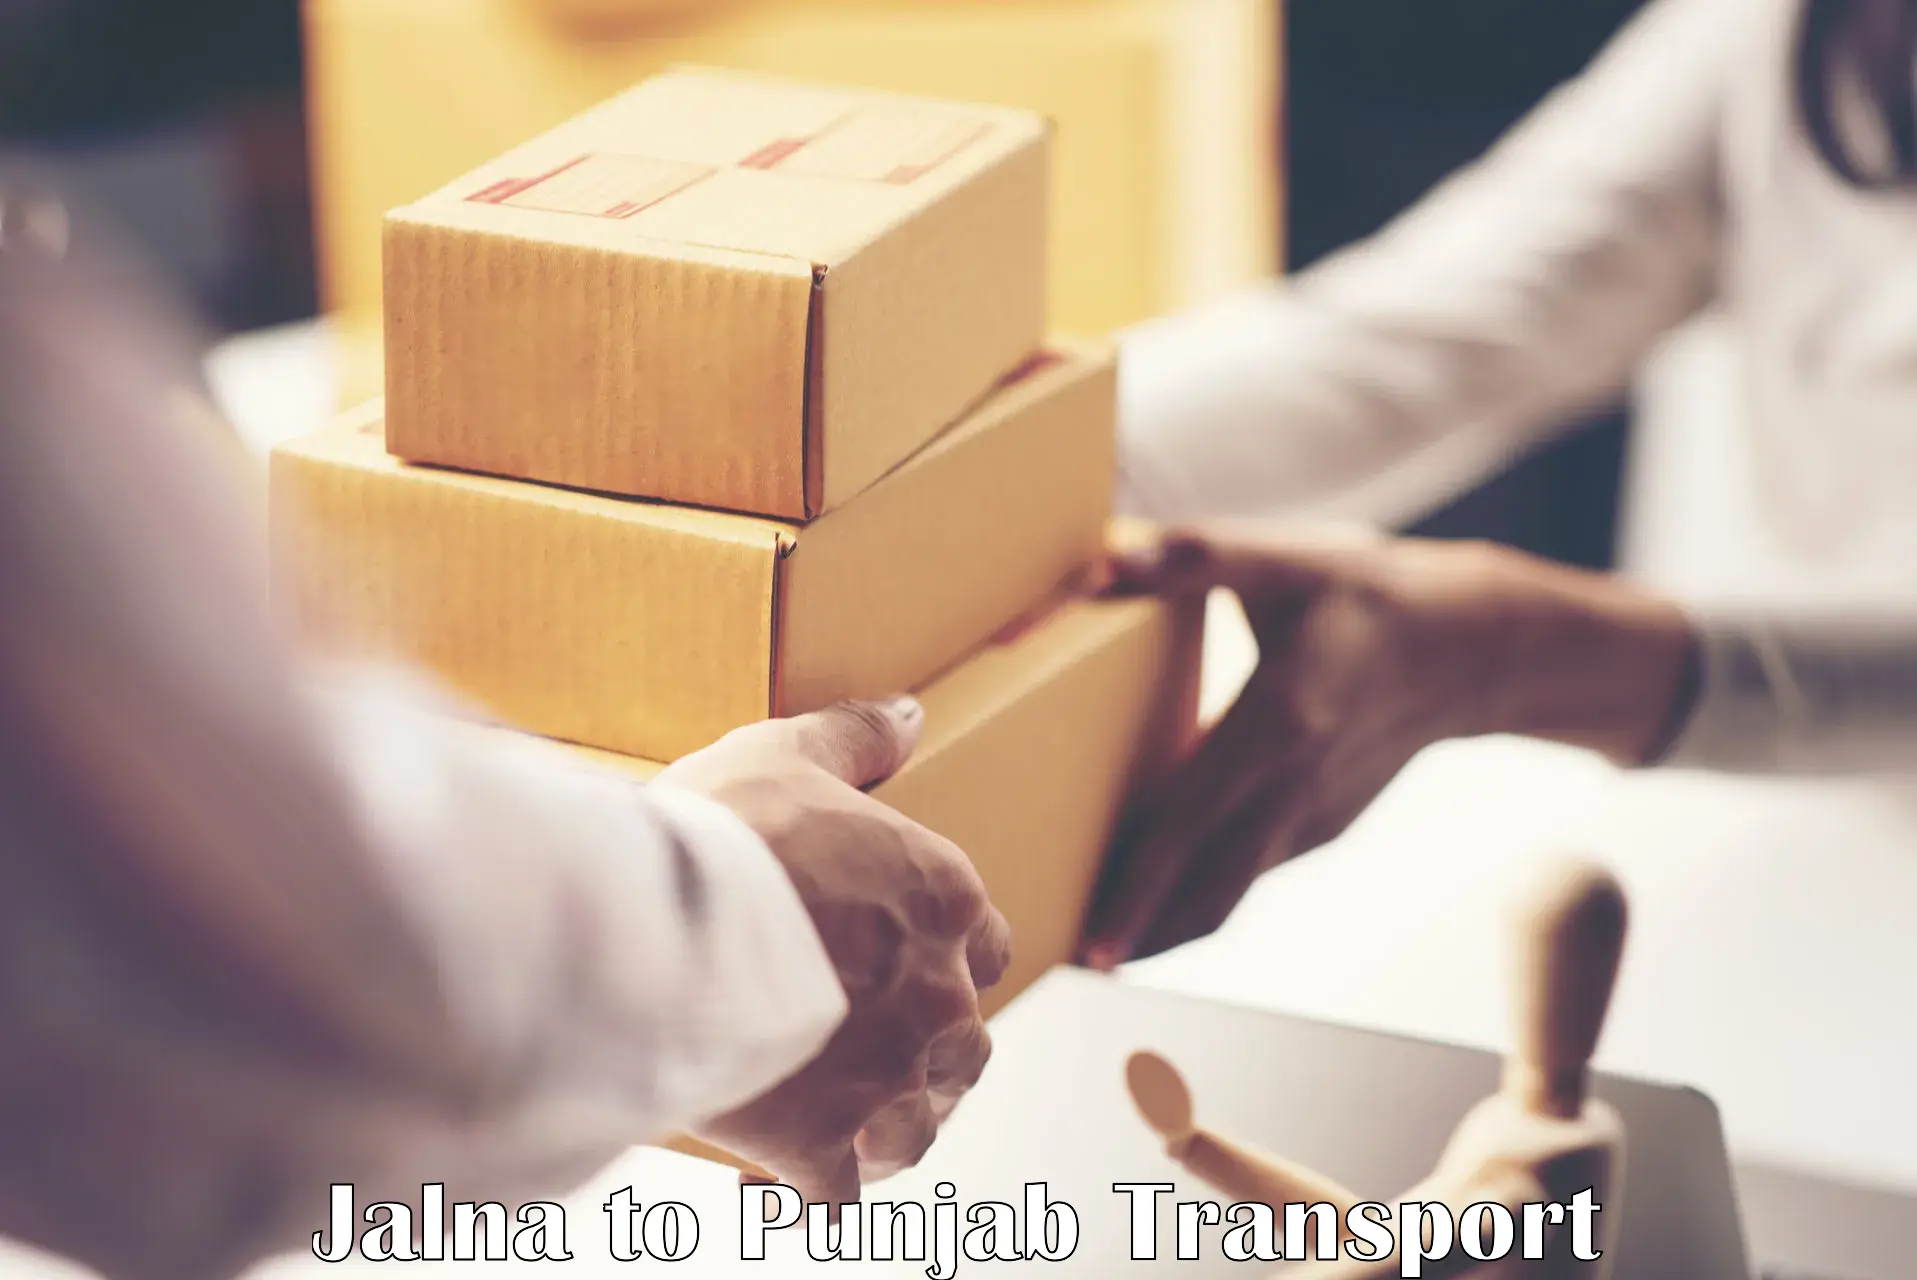 Road transport online services in Jalna to Patiala